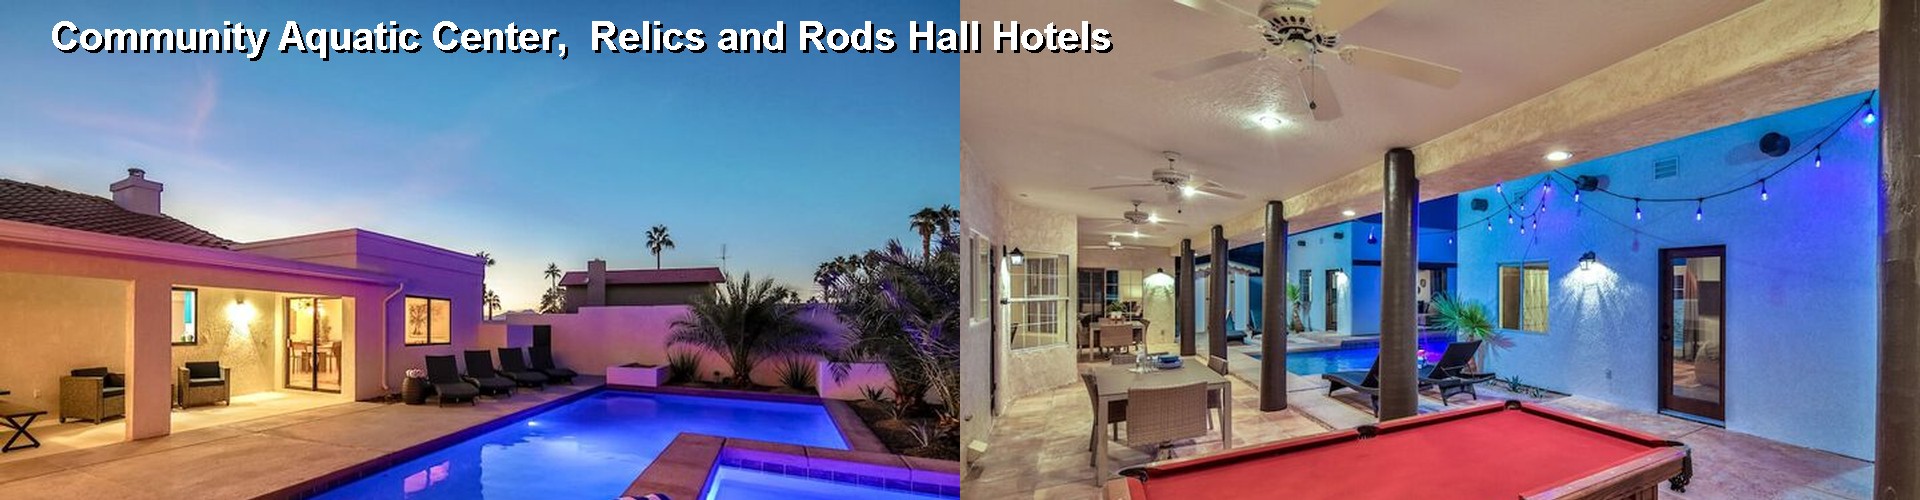 5 Best Hotels near Community Aquatic Center,  Relics and Rods Hall